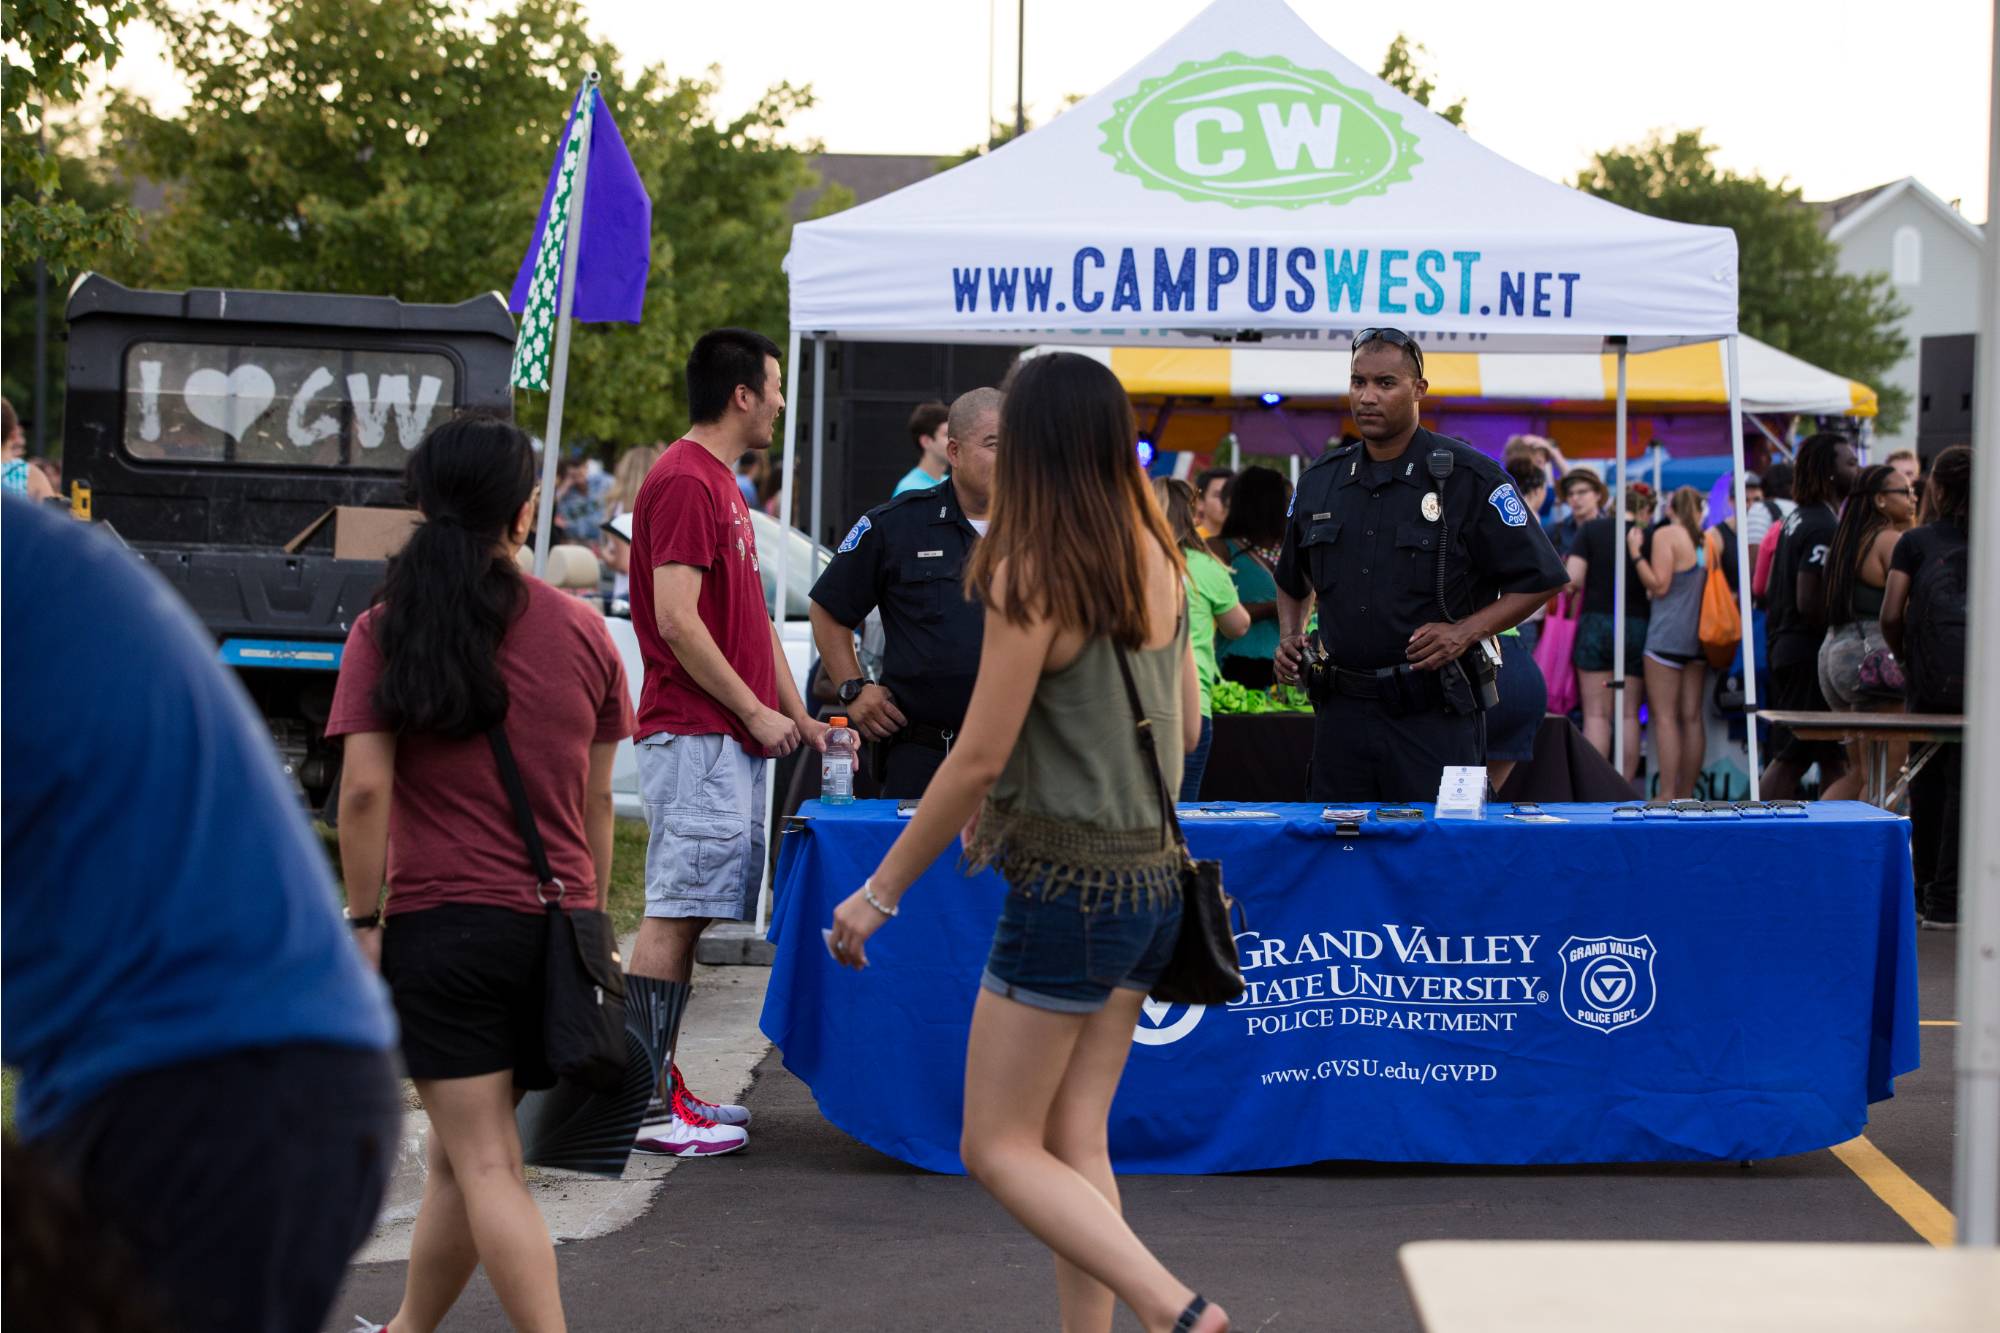 Campus West tented booth.